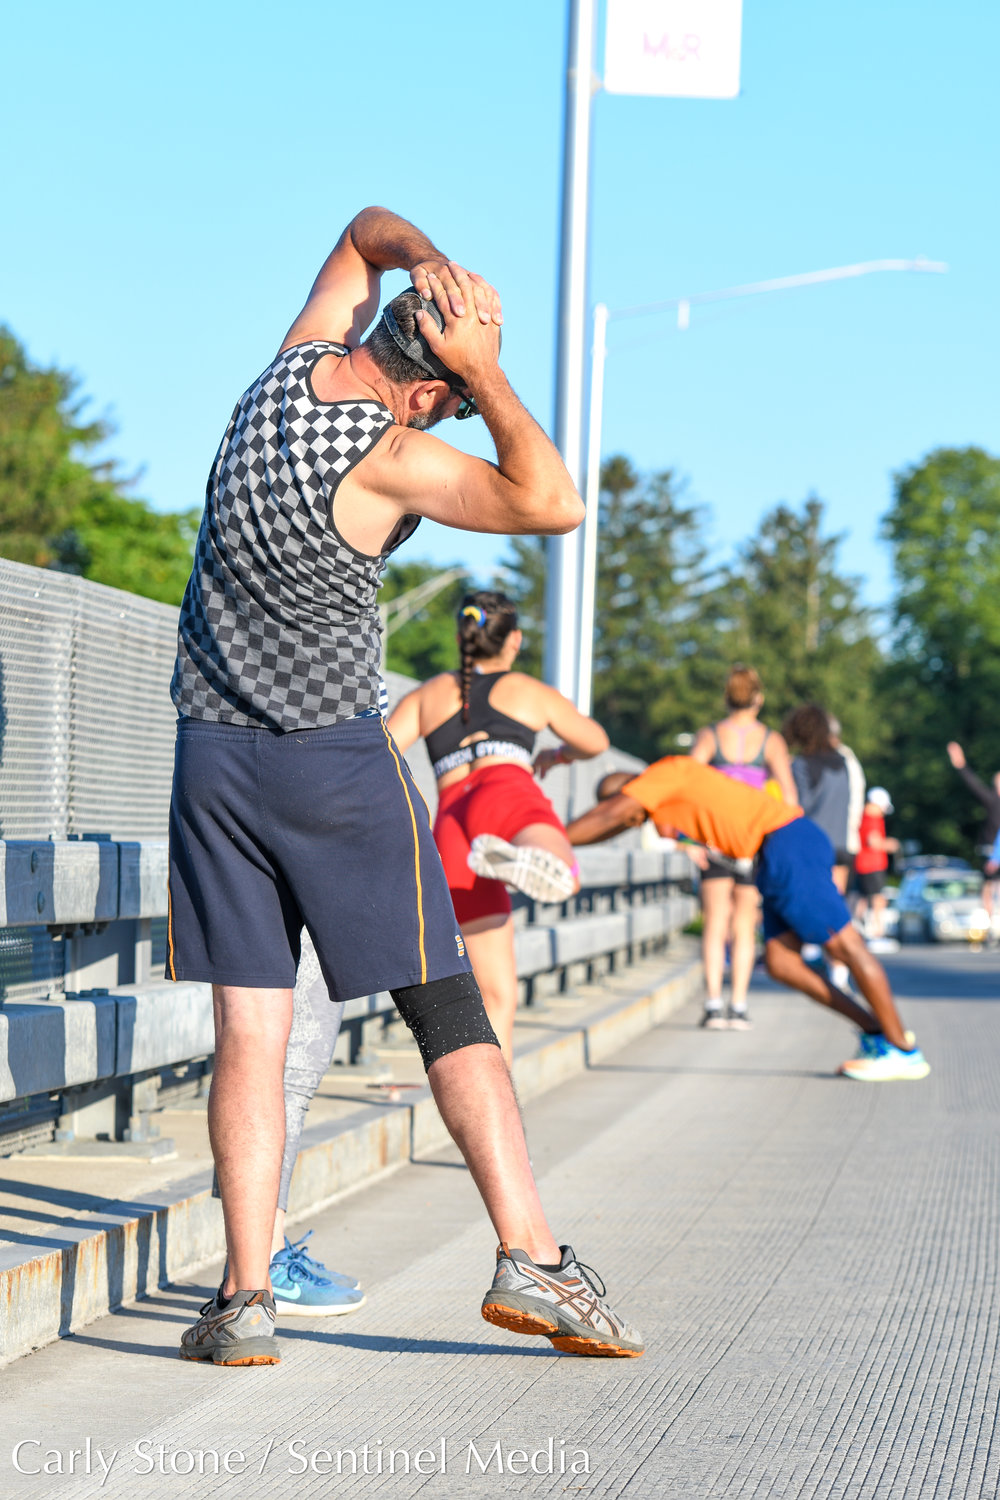 Jon Taylor, from Poland, New York, stretches on Burrstone Road bridge before running in the 2022 Boilermaker 5K in Utica.